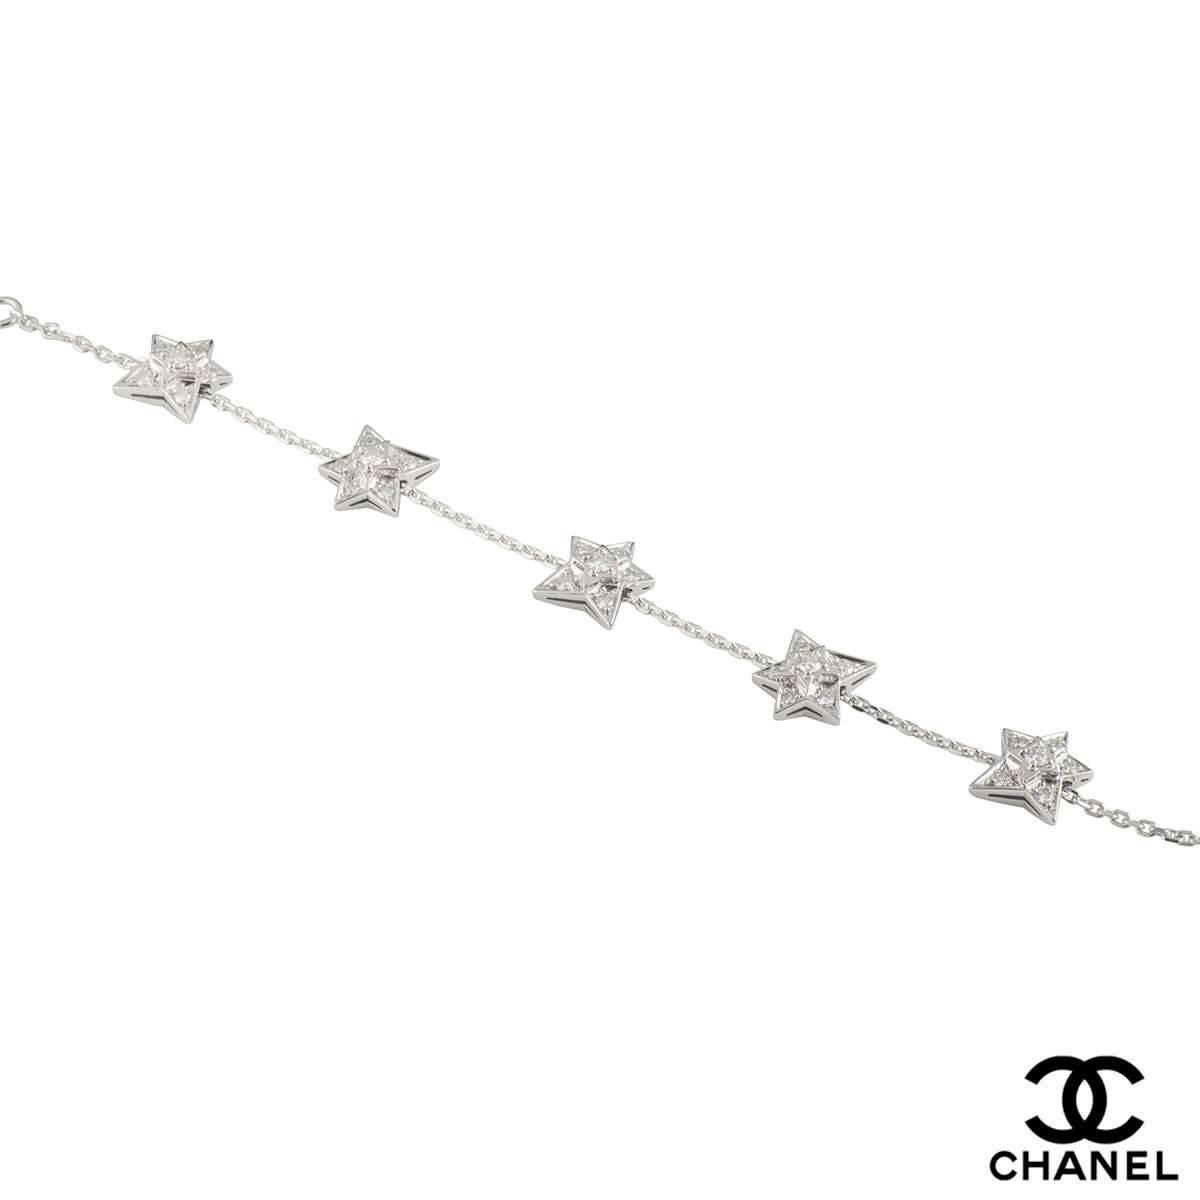 A sparkly 18k white gold diamond Chanel bracelet from the Comete collection. The bracelet comprises of 5 star motifs with round brilliant cut diamonds in a pave setting, with a total weight of 0.90ct, D-F colour and VVS1 clarity. The bracelet